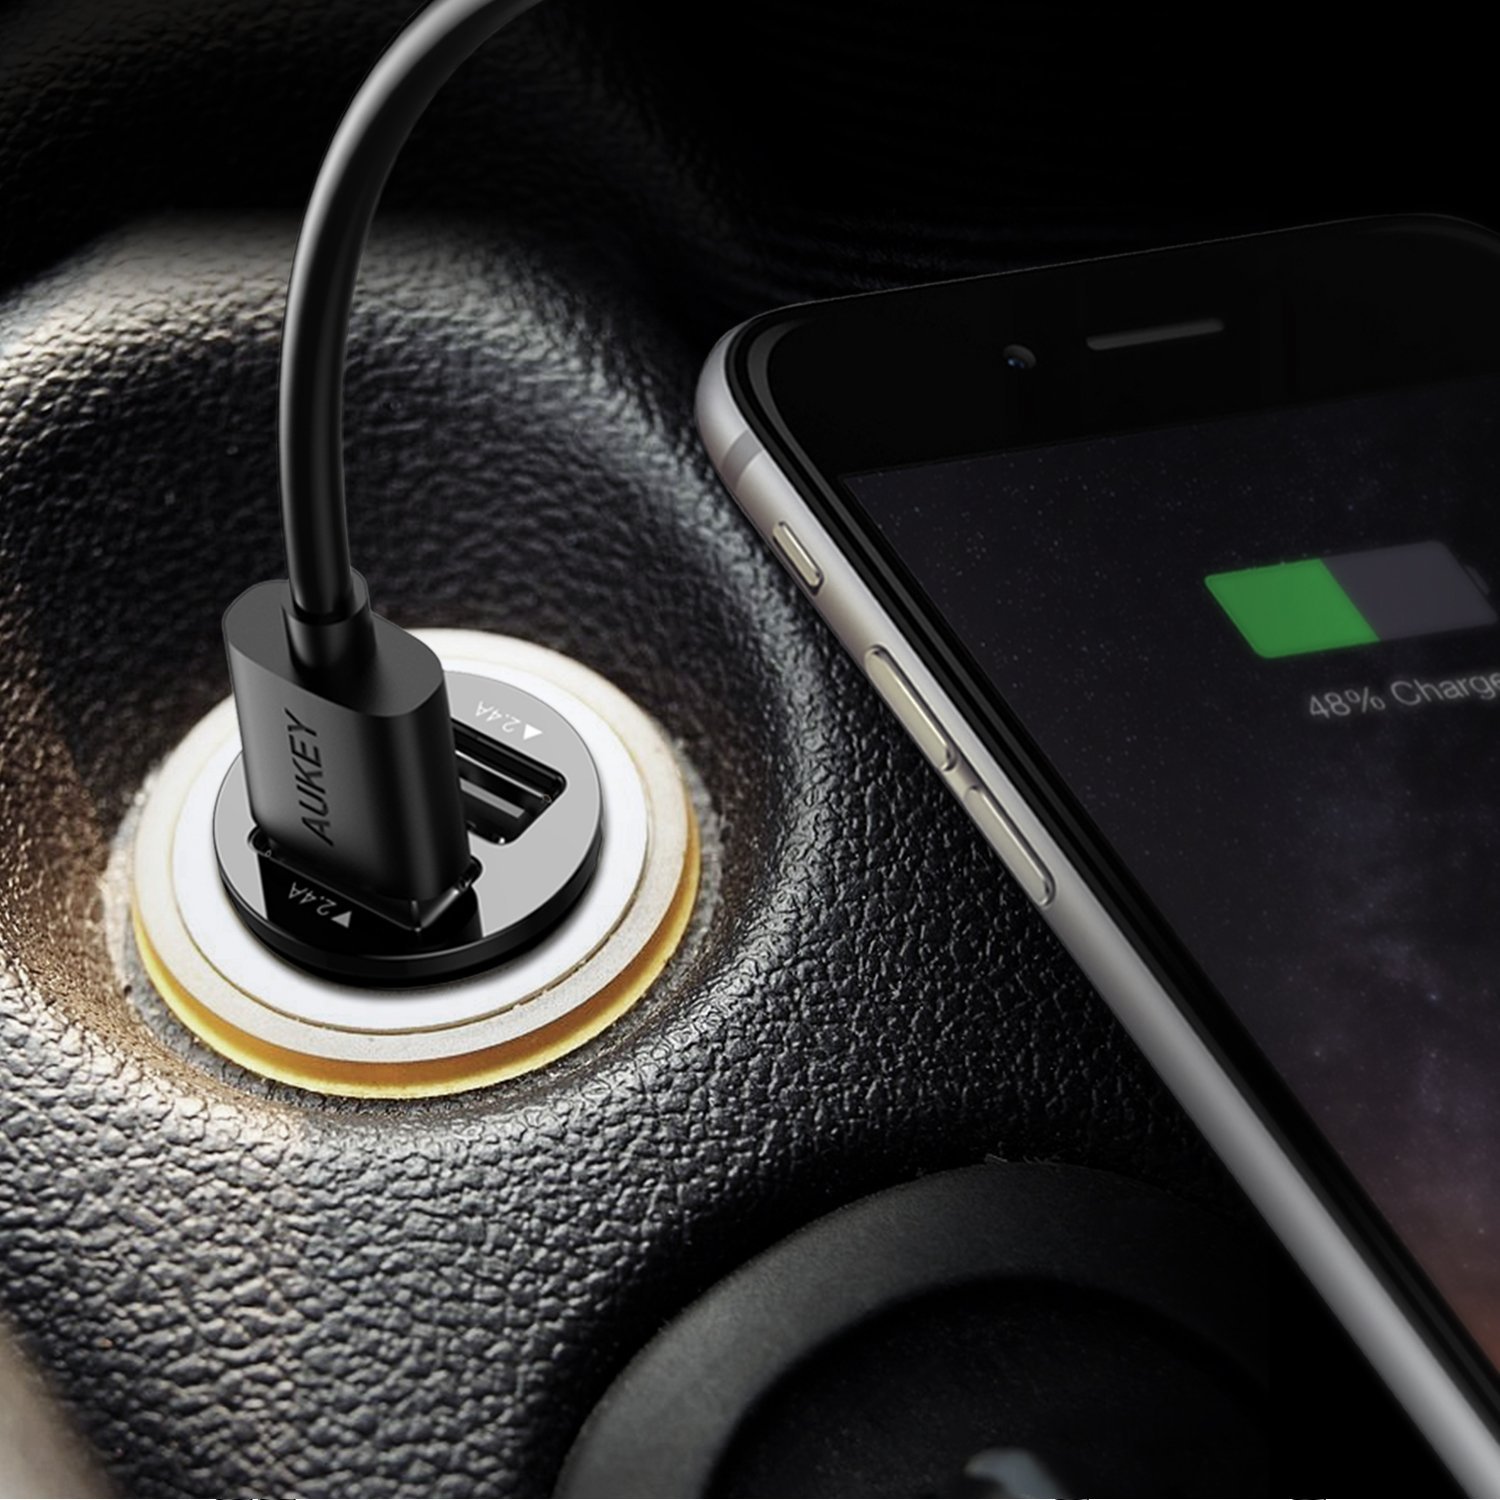 chargeur voiture pour iPhone, iPad, smartphone,Tablette Samsung Galaxy et Appareils Android